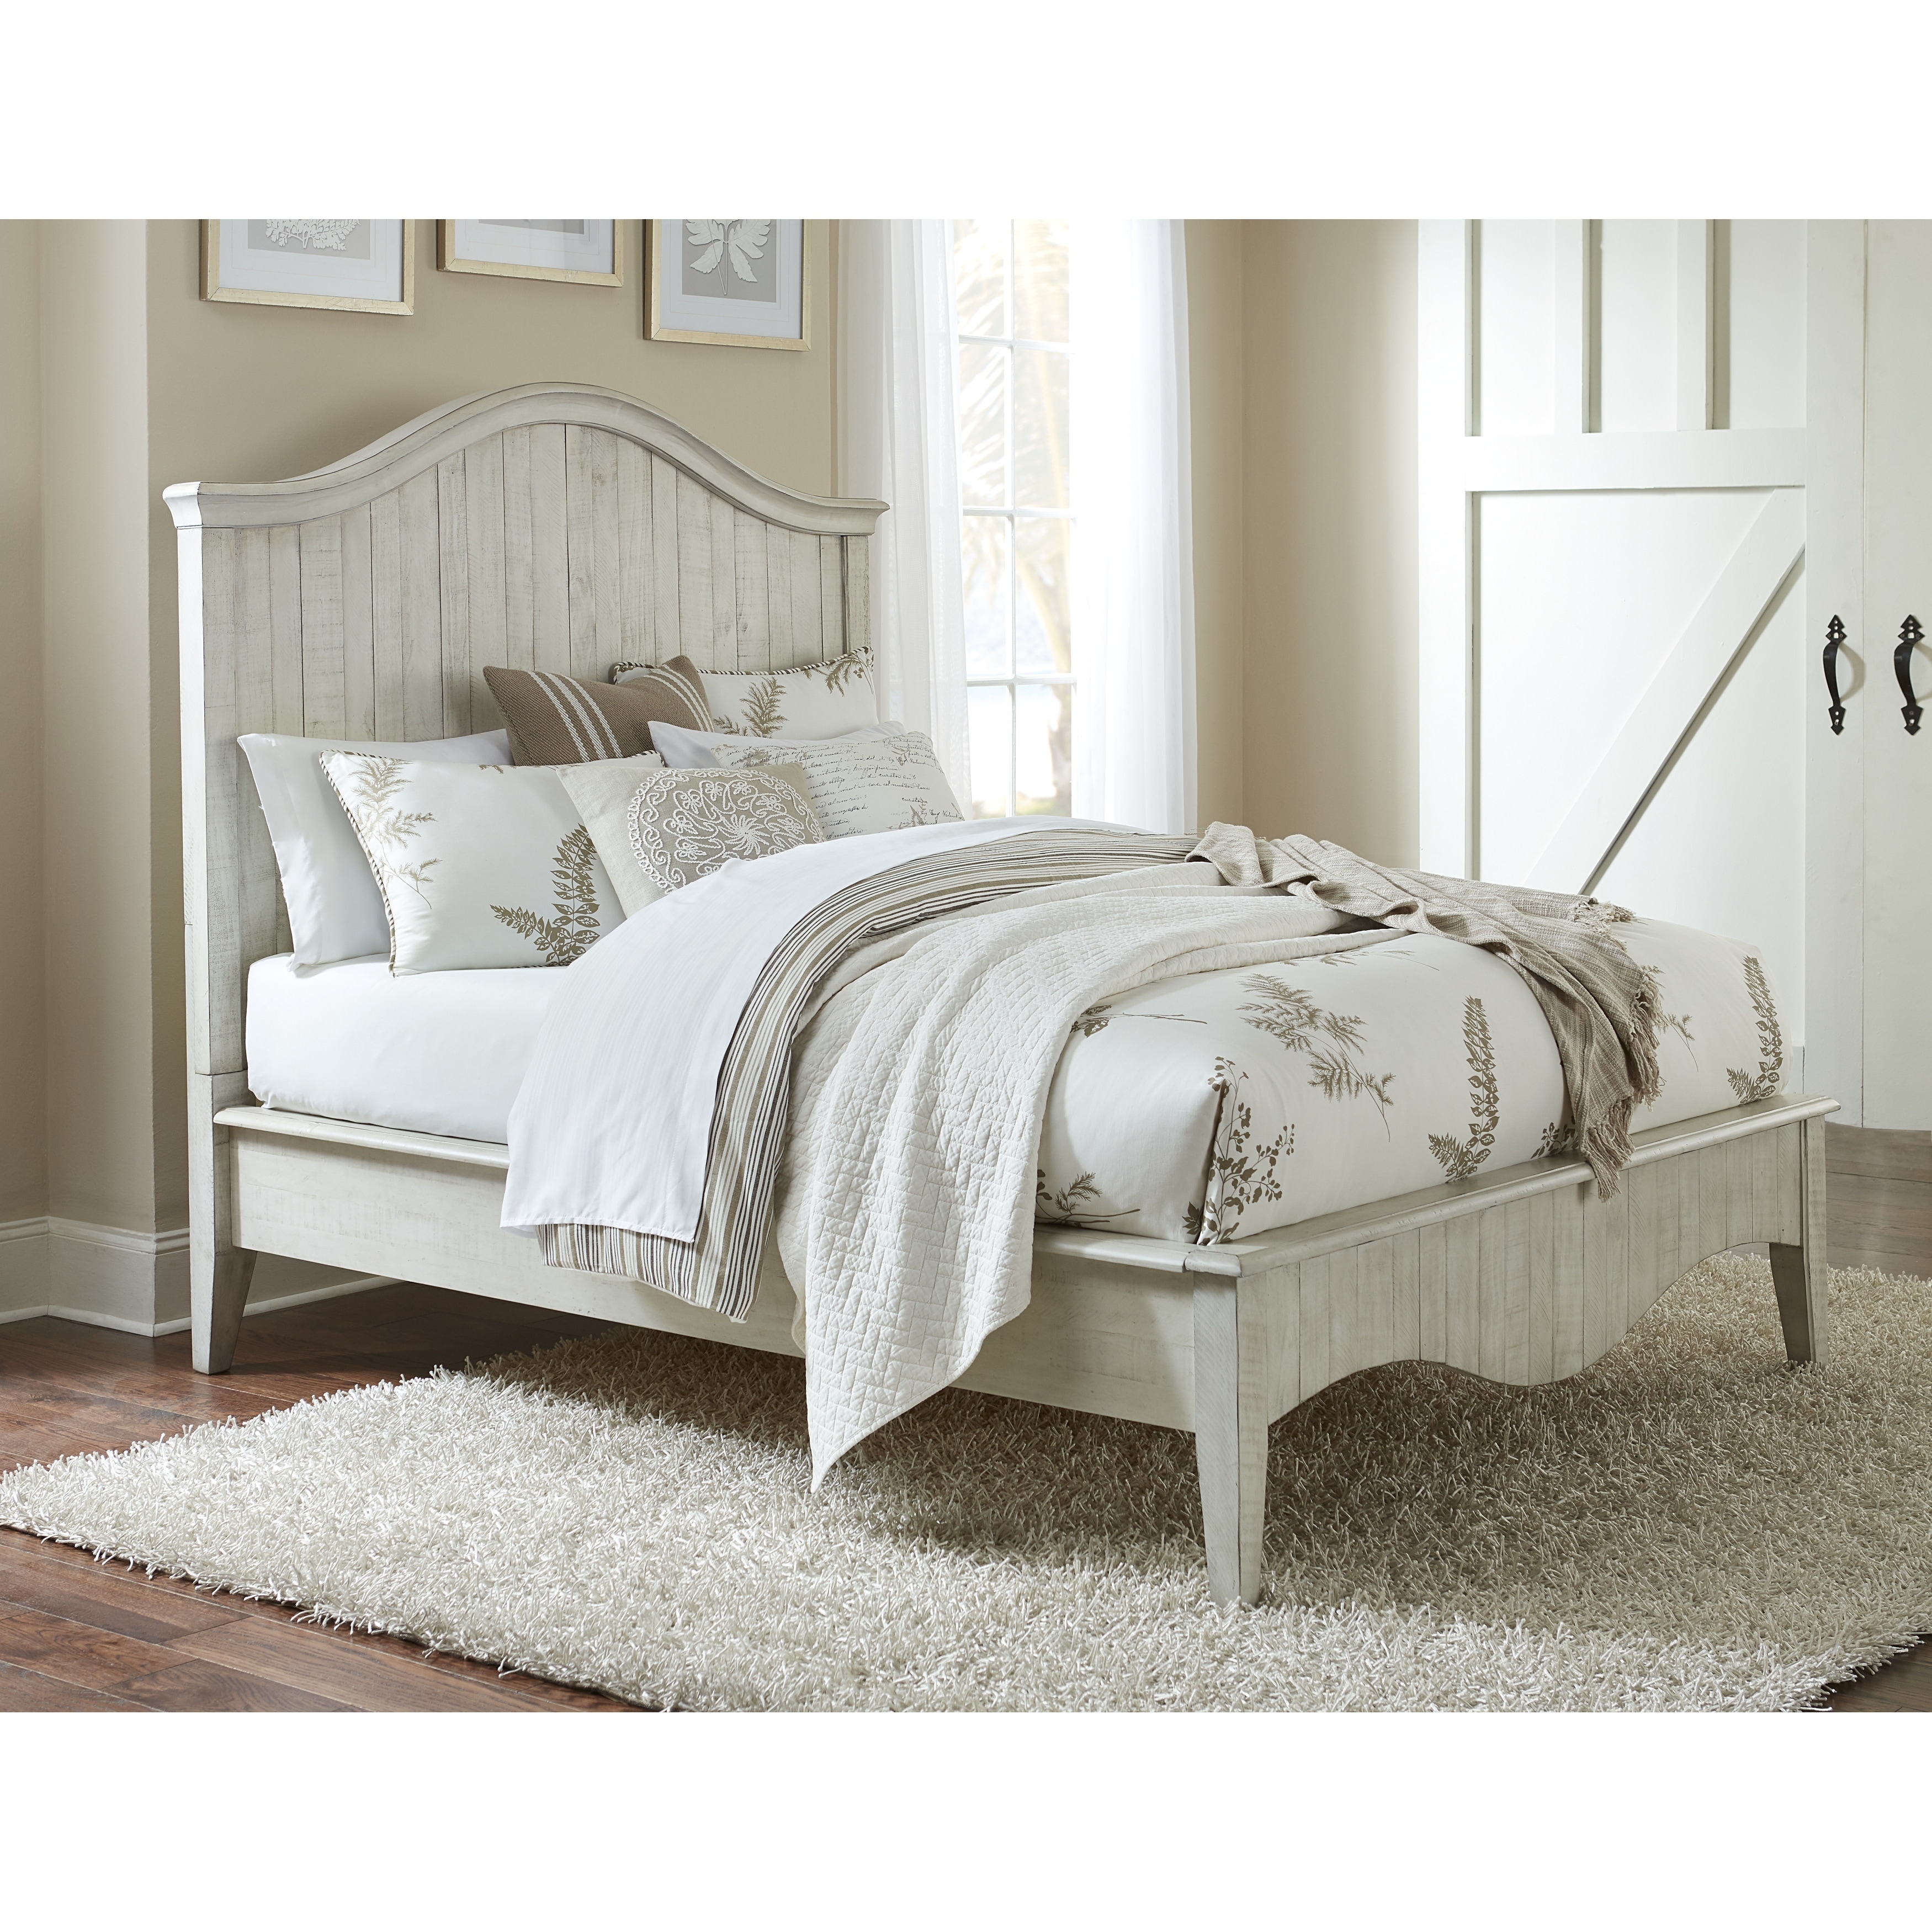 Ella Solid Wood California-King Bed in White Wash